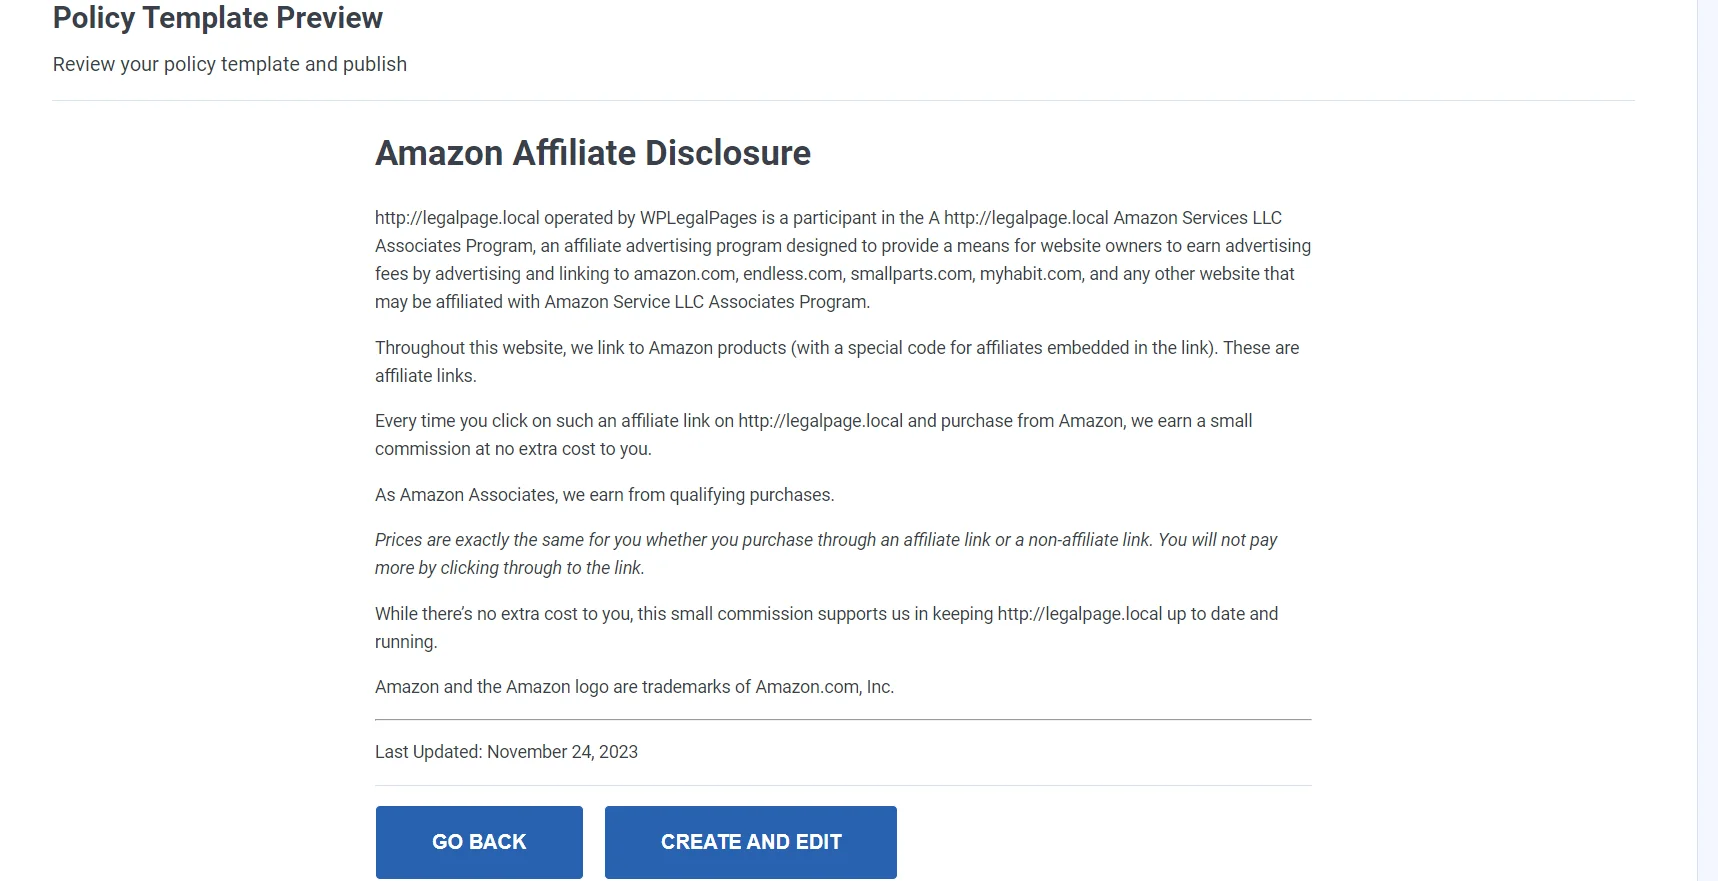 Final Template Review- Amazon Affiliate disclaimers 